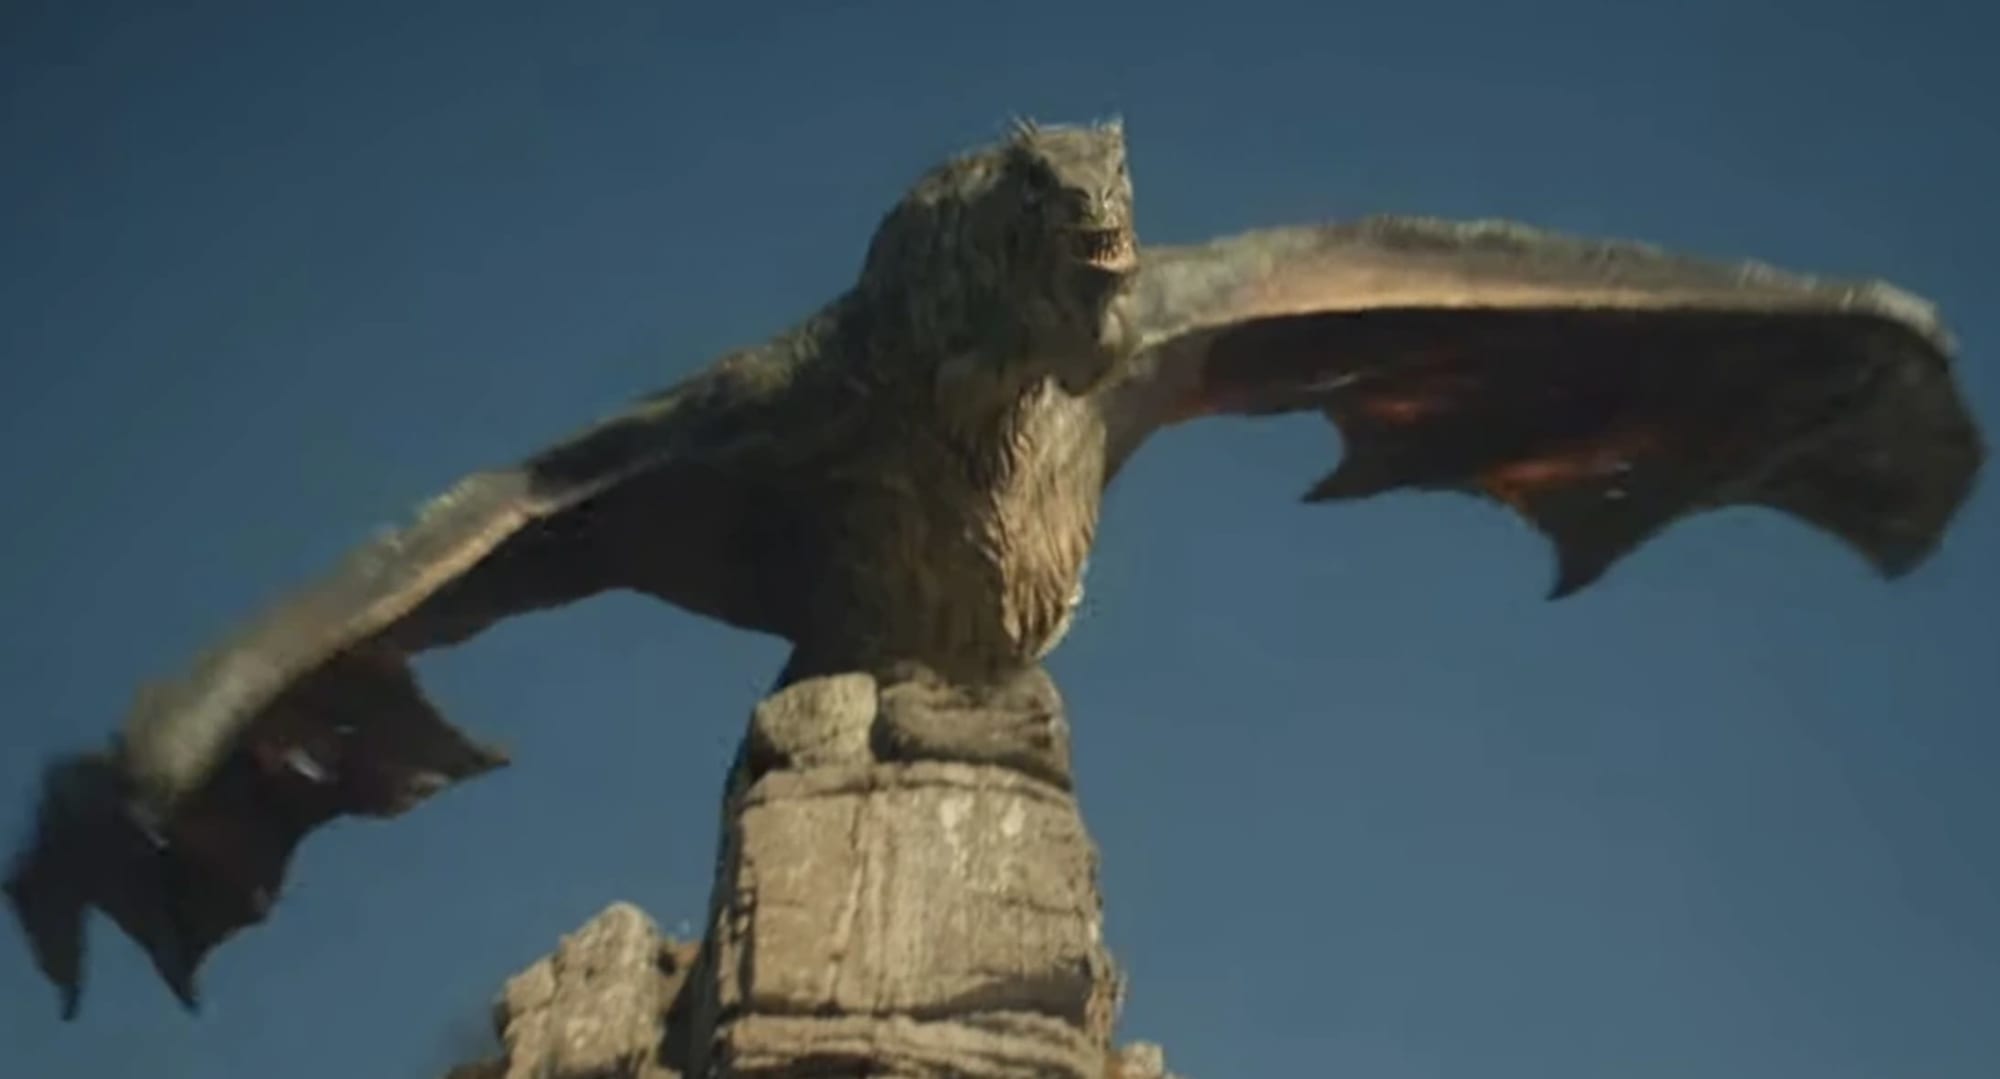 House of the Dragon Season 2 is not in danger through Hollywood's Writers  Strike - Meristation